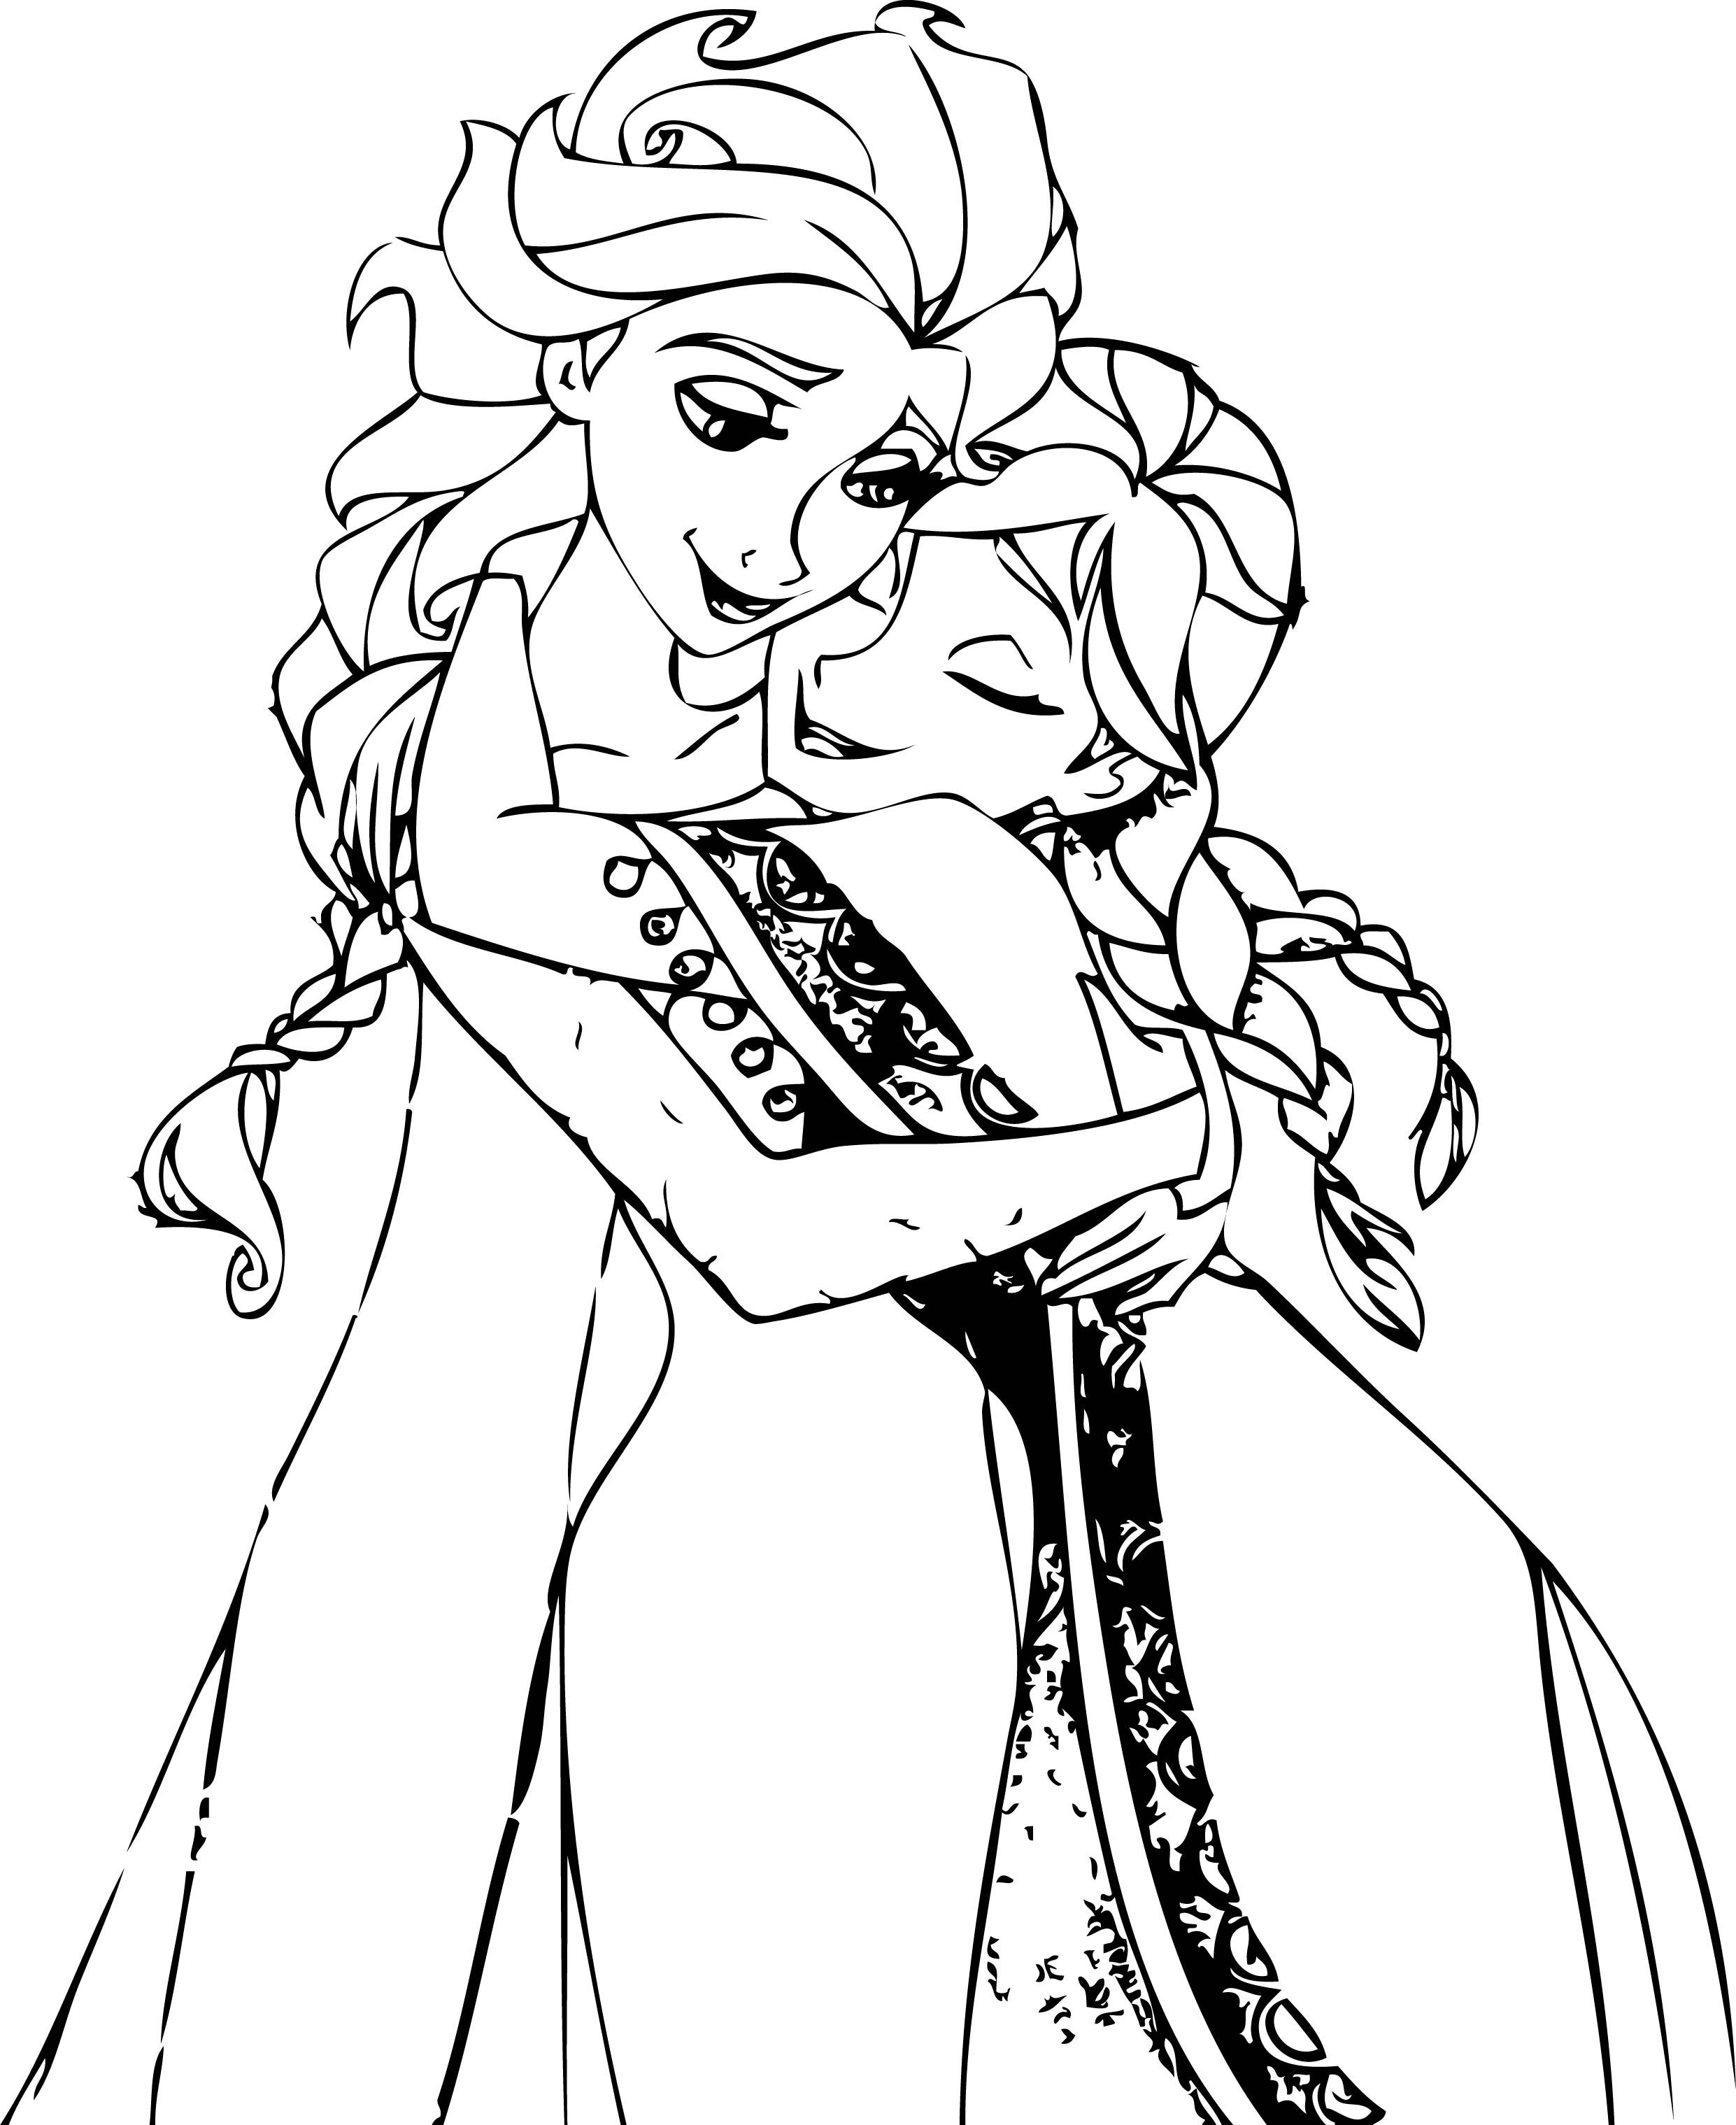 Elsa_And_Anna_Hug_Coloring_Pages | Wecoloringpage